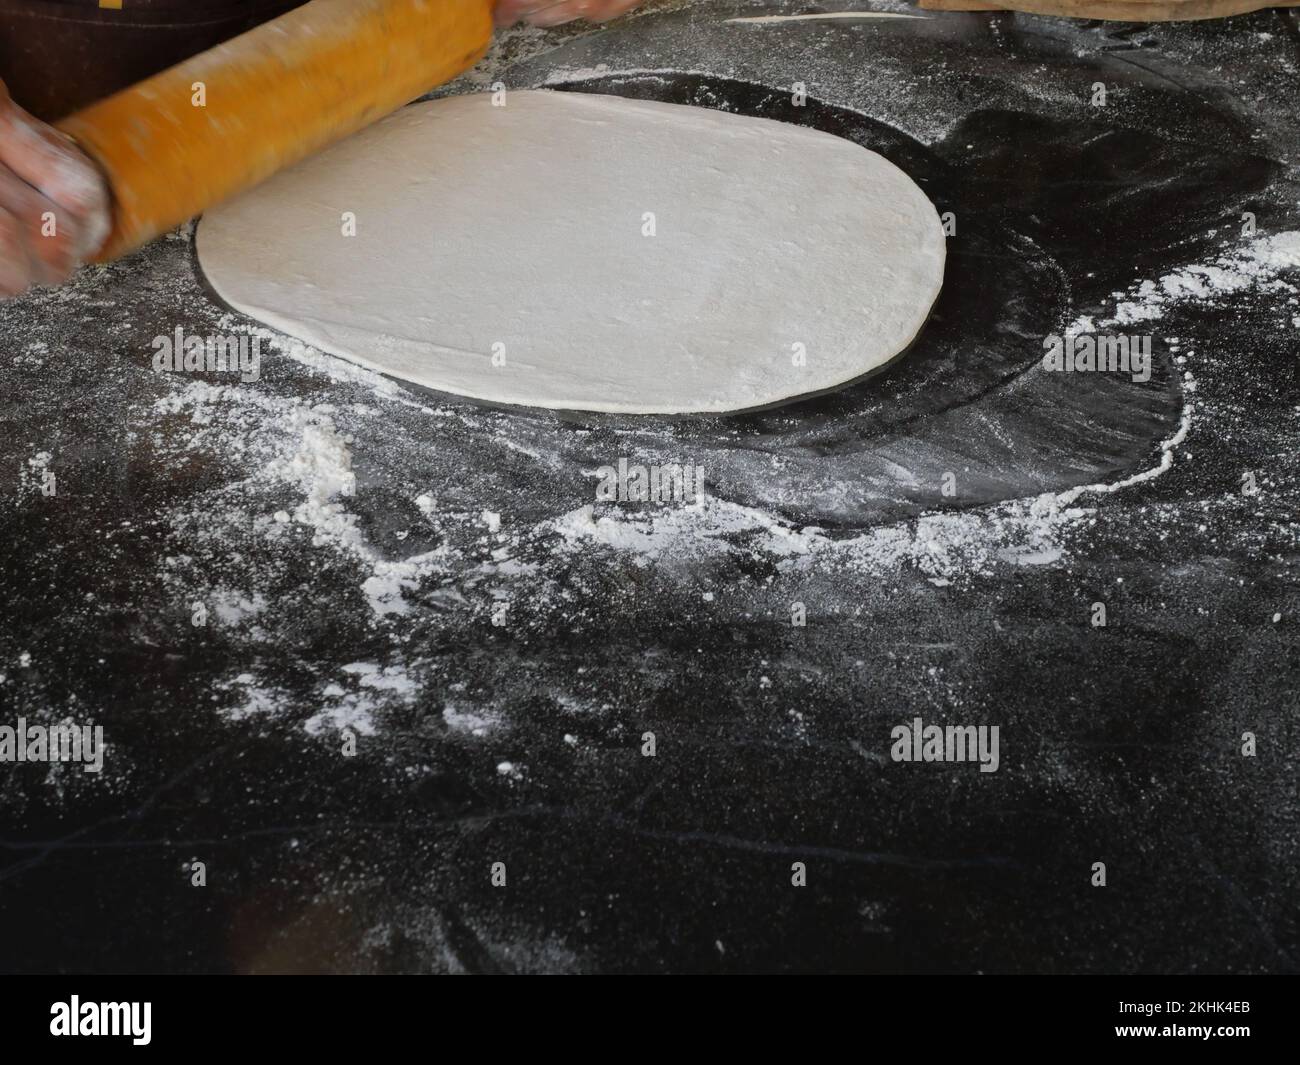 The chef's hand is rolling pizza dough into a flatten circle shape by wooden rolling pin with flour on black background Stock Photo